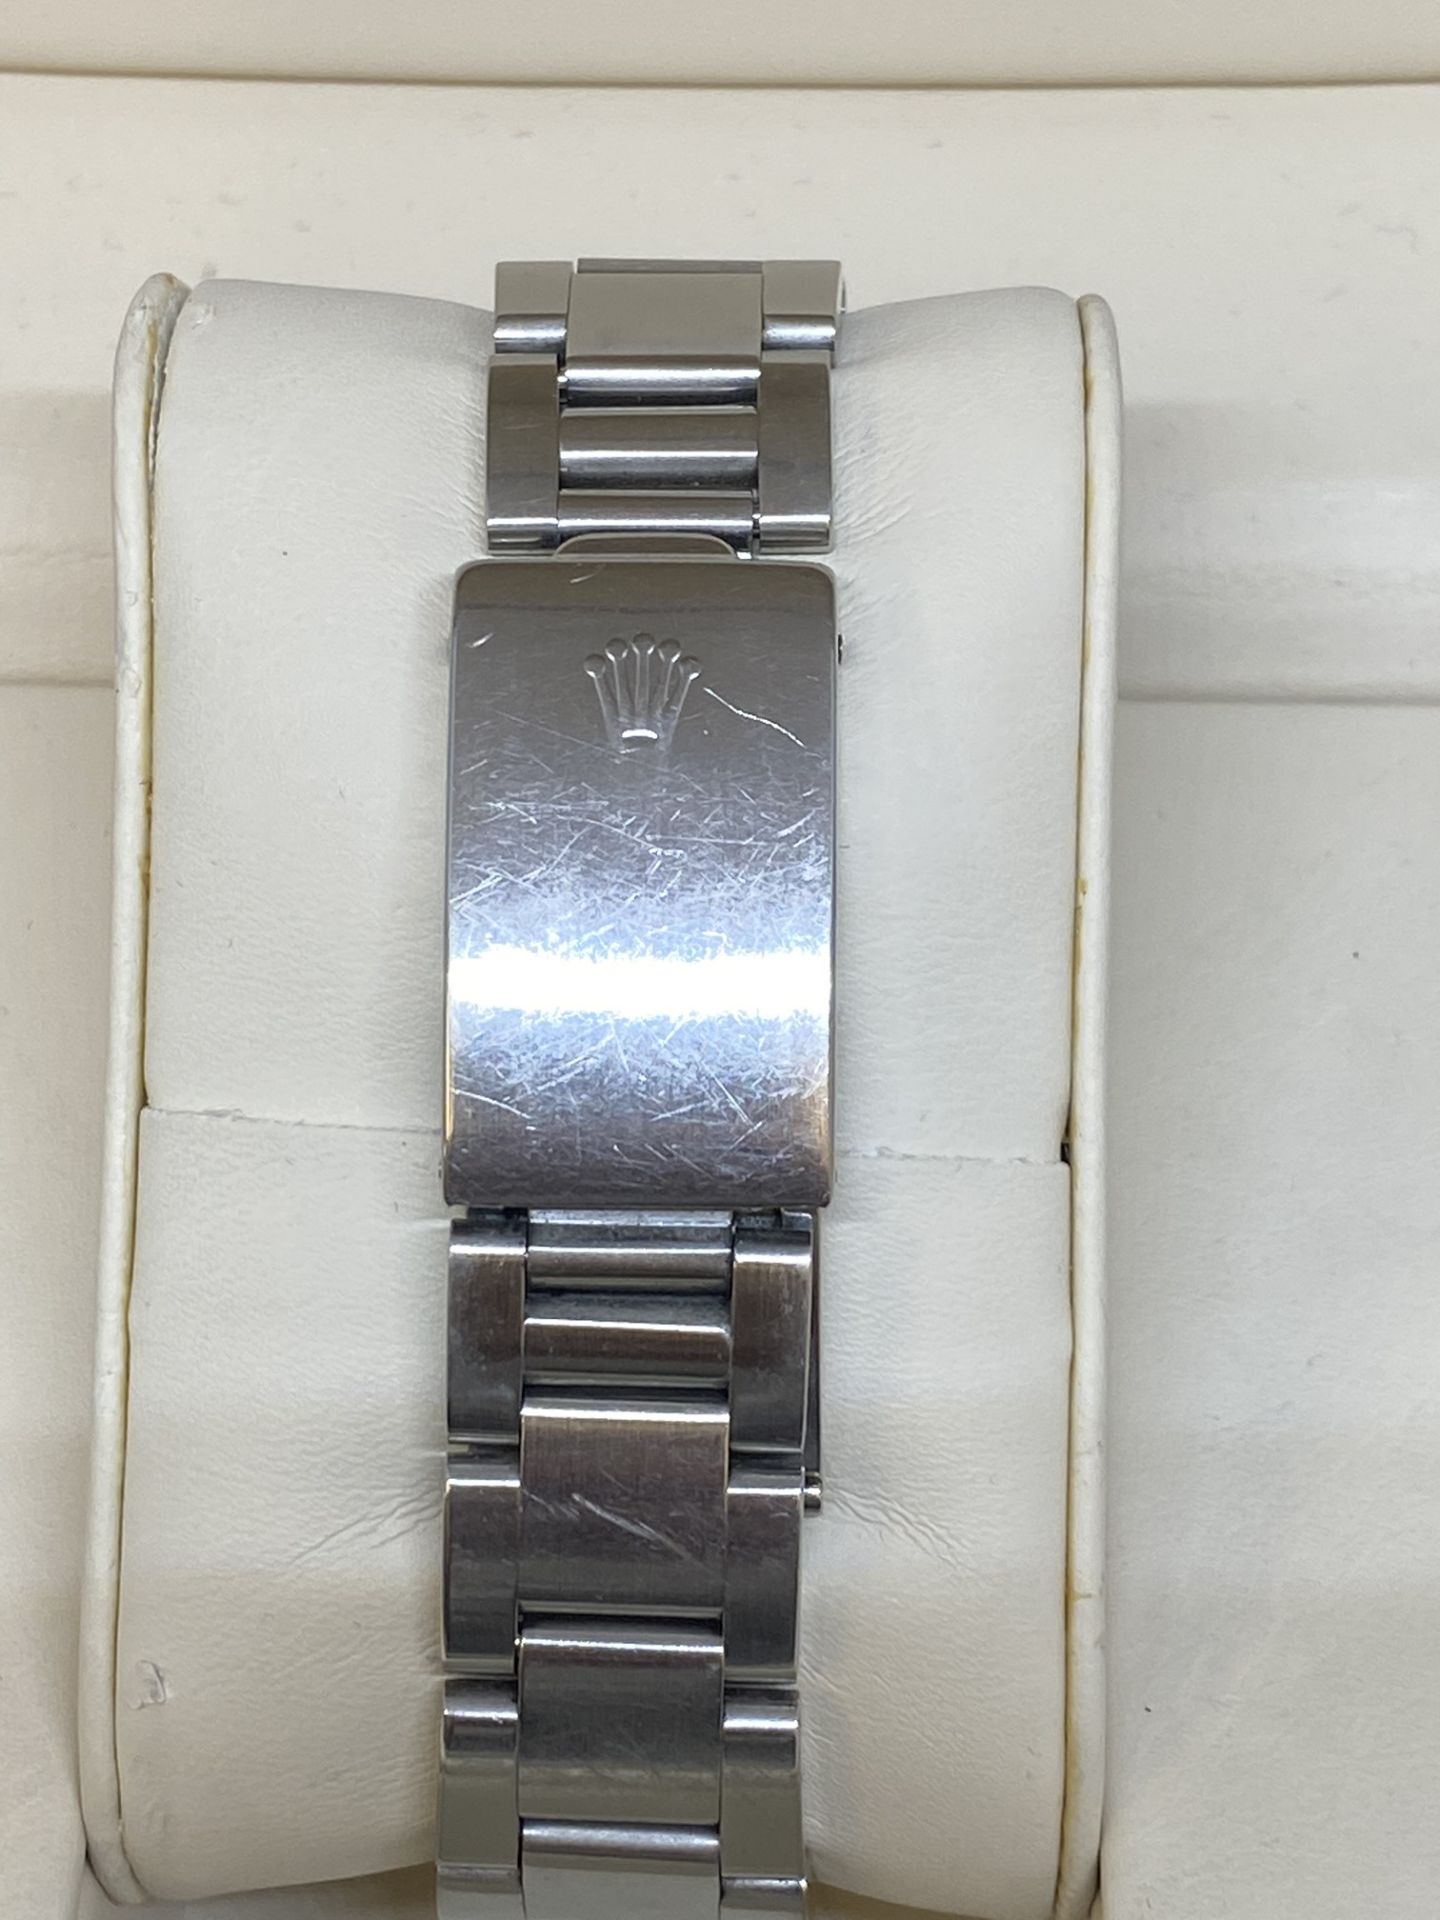 ROLEX STAINLESS STEEL WATCH - Image 4 of 8